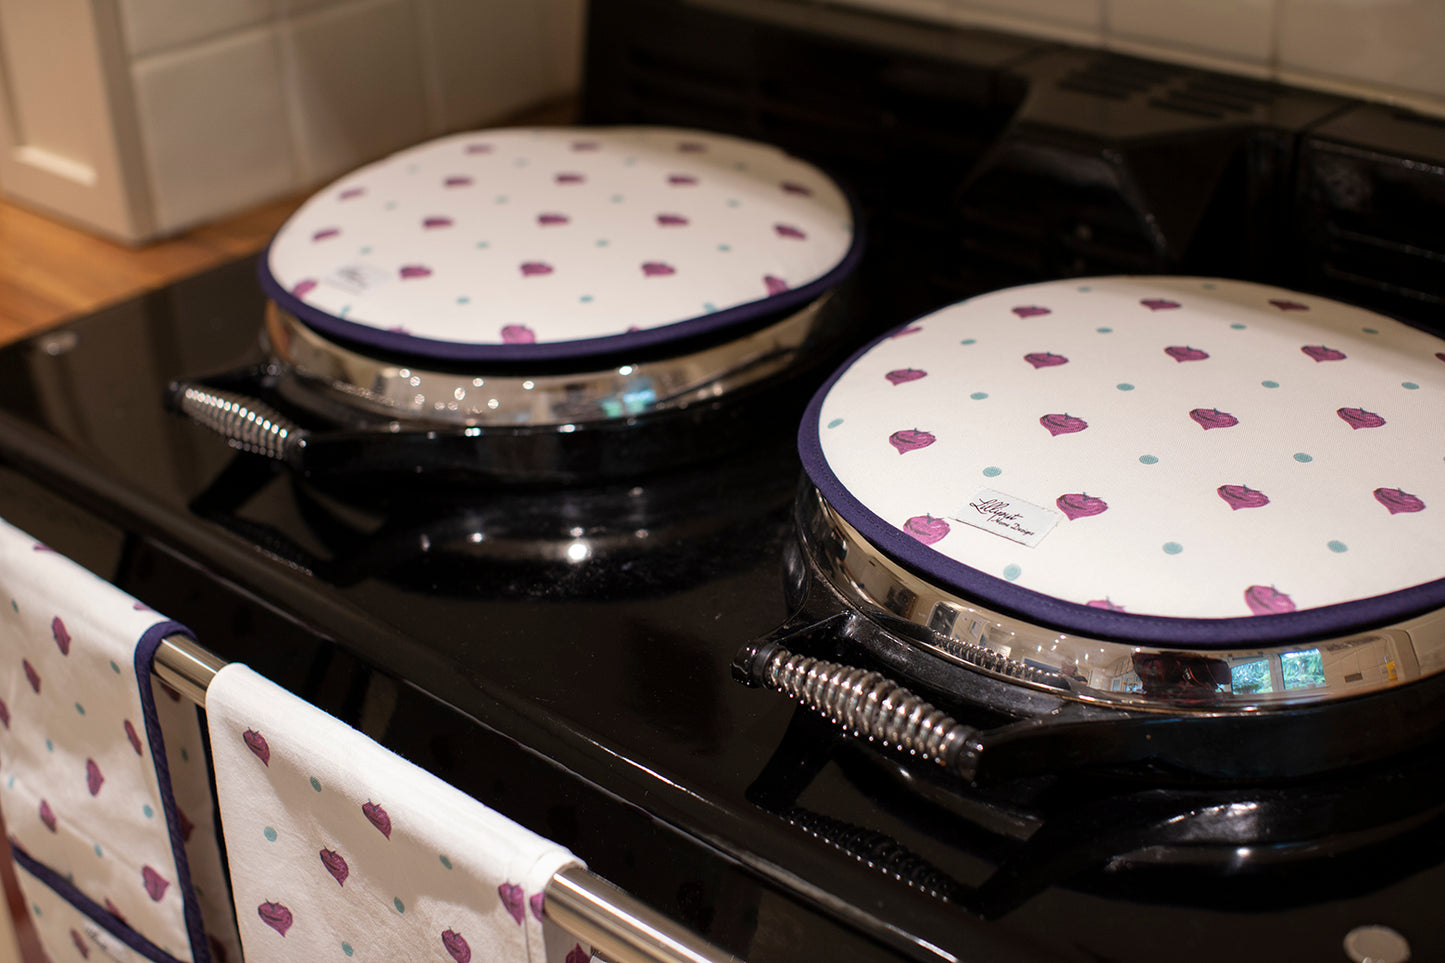 Beetroot homewares collection Aga hob covers with Terry towelling backing, matching tea towels and oven gloves